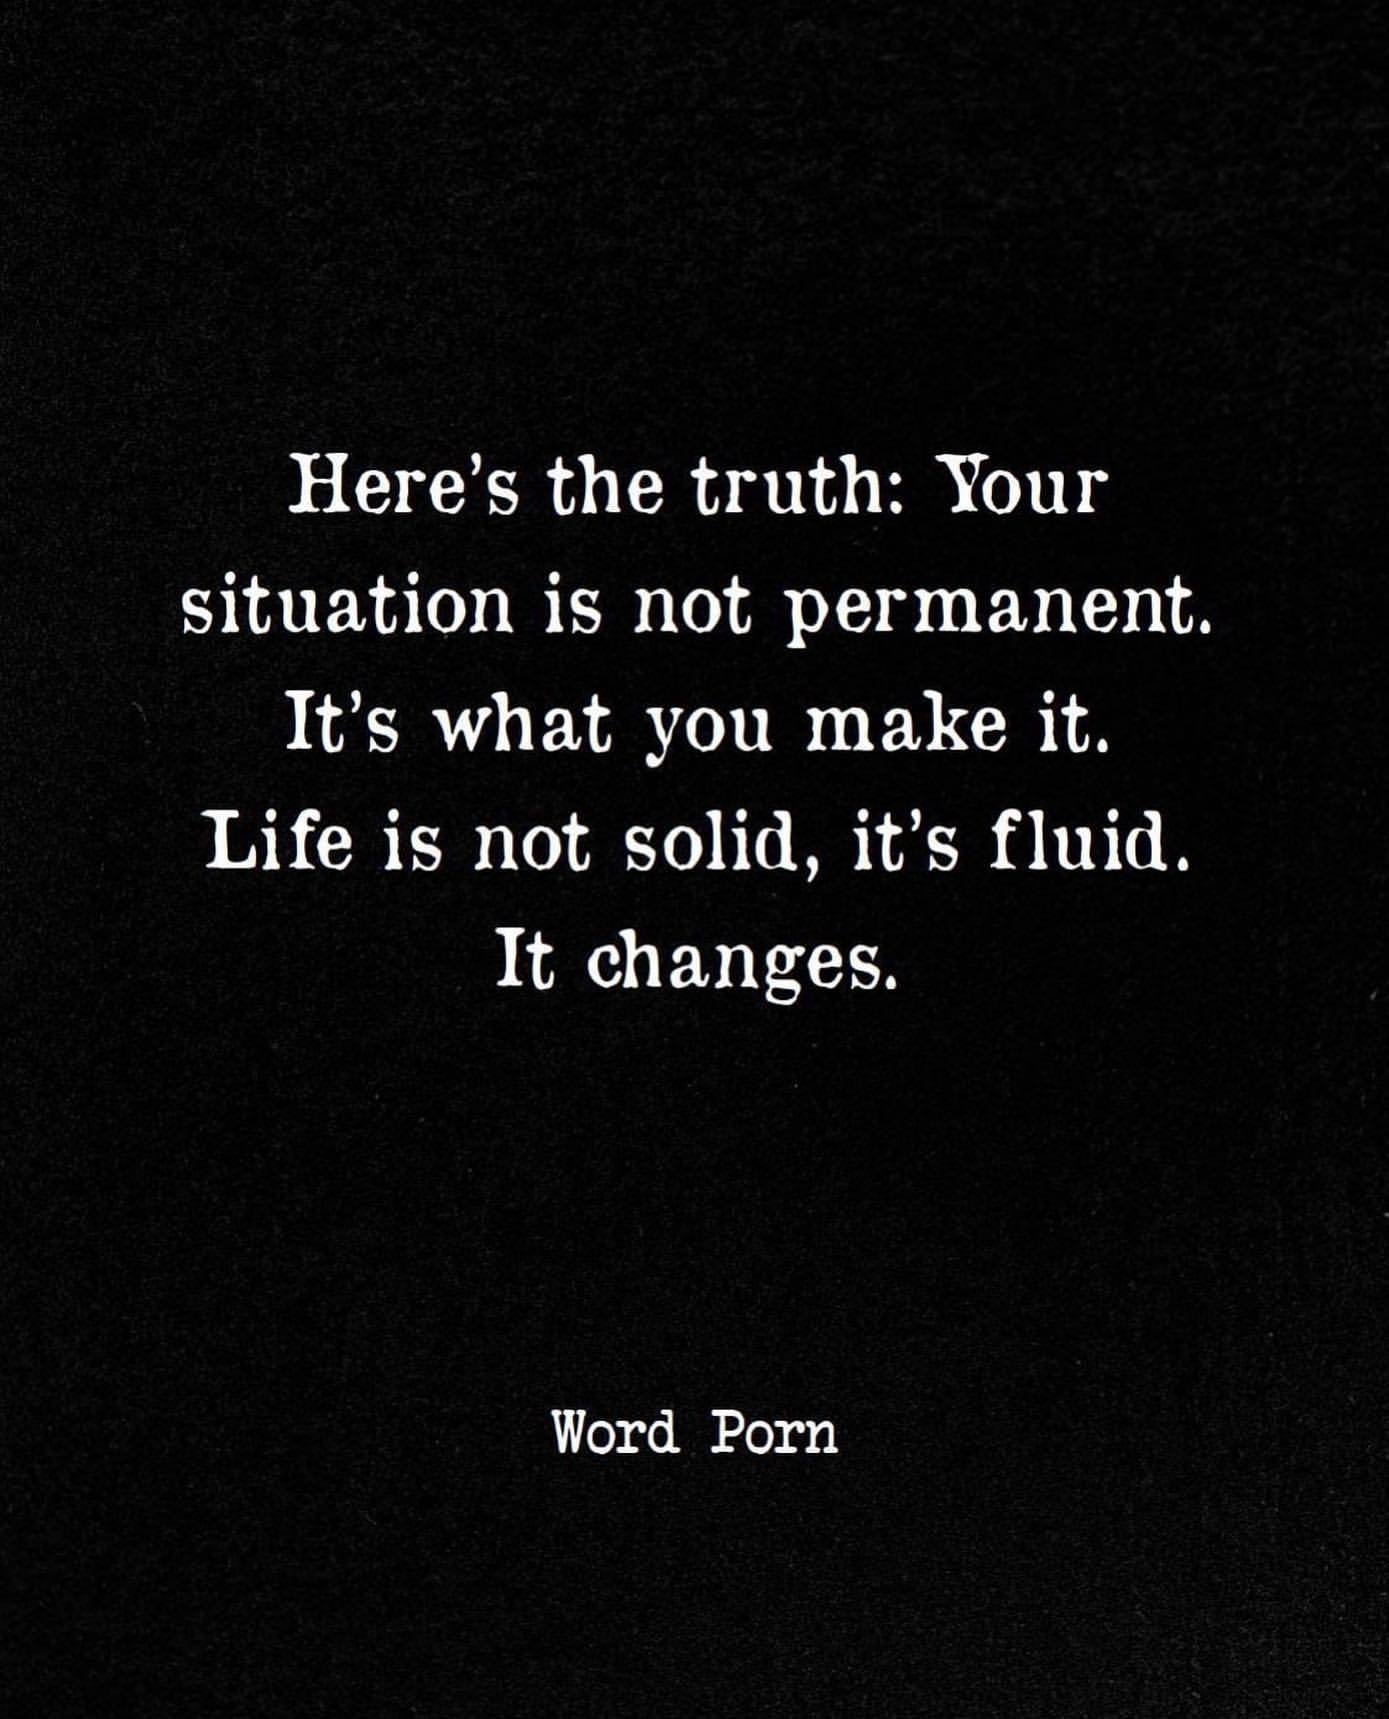 Here's the truth: Tour situation is not permanent. It's what you make it. Life is not solid, it's fluid. It changes.